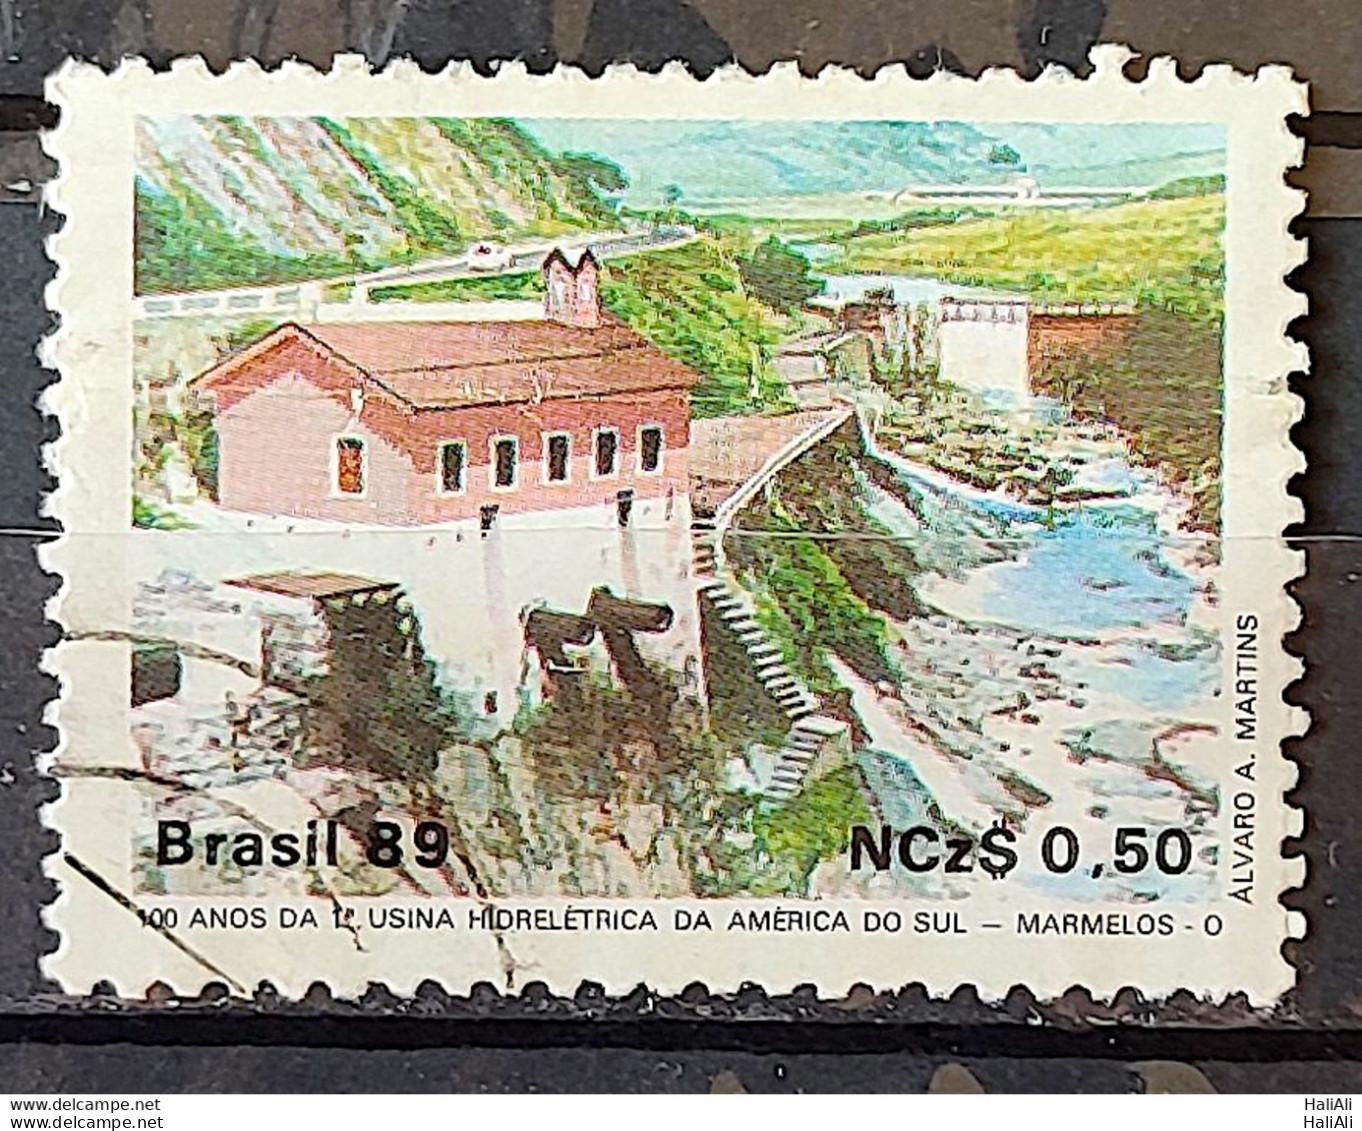 C 1644 Brazil Stamp 100 Years Hydroelectric Marmelos Energy Electricity Juiz De Fora 1989 Circulated 24 - Gebraucht